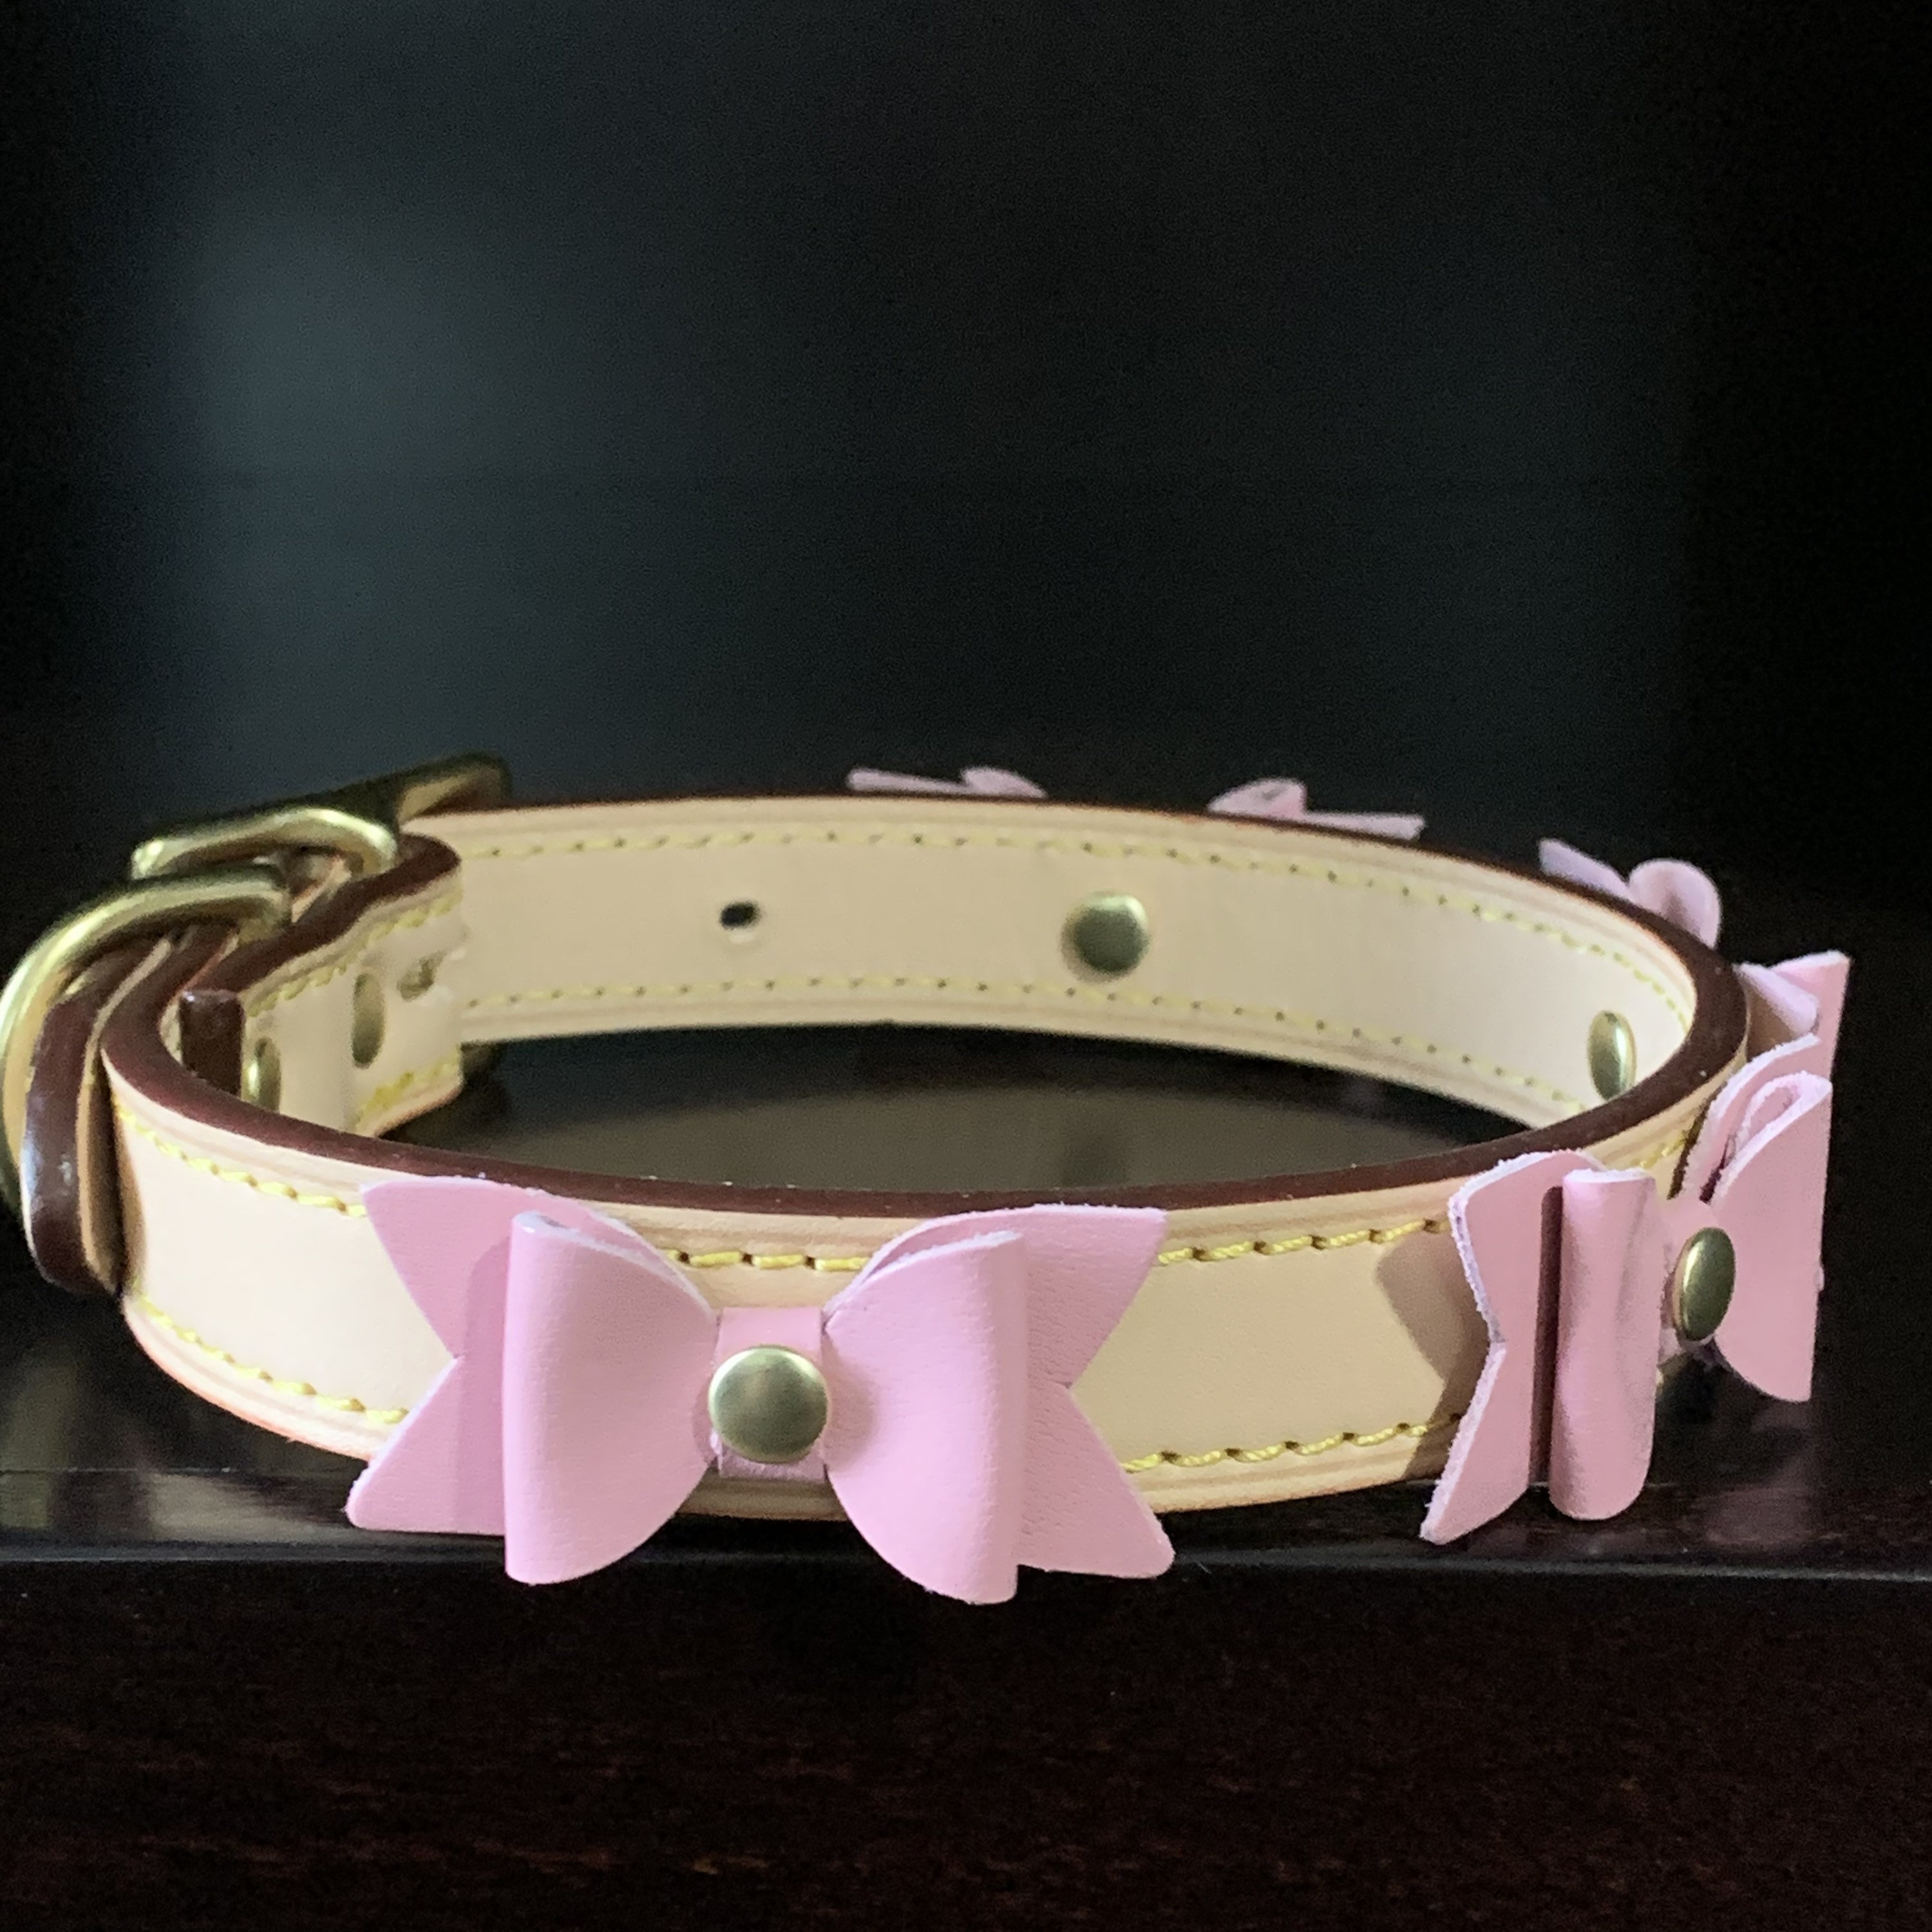 Teacup and Toy Pets Boutique Grooming, Clothes, Carriers, Collars - Chewy  Vuiton - Louis Vuitton - Dog Bed